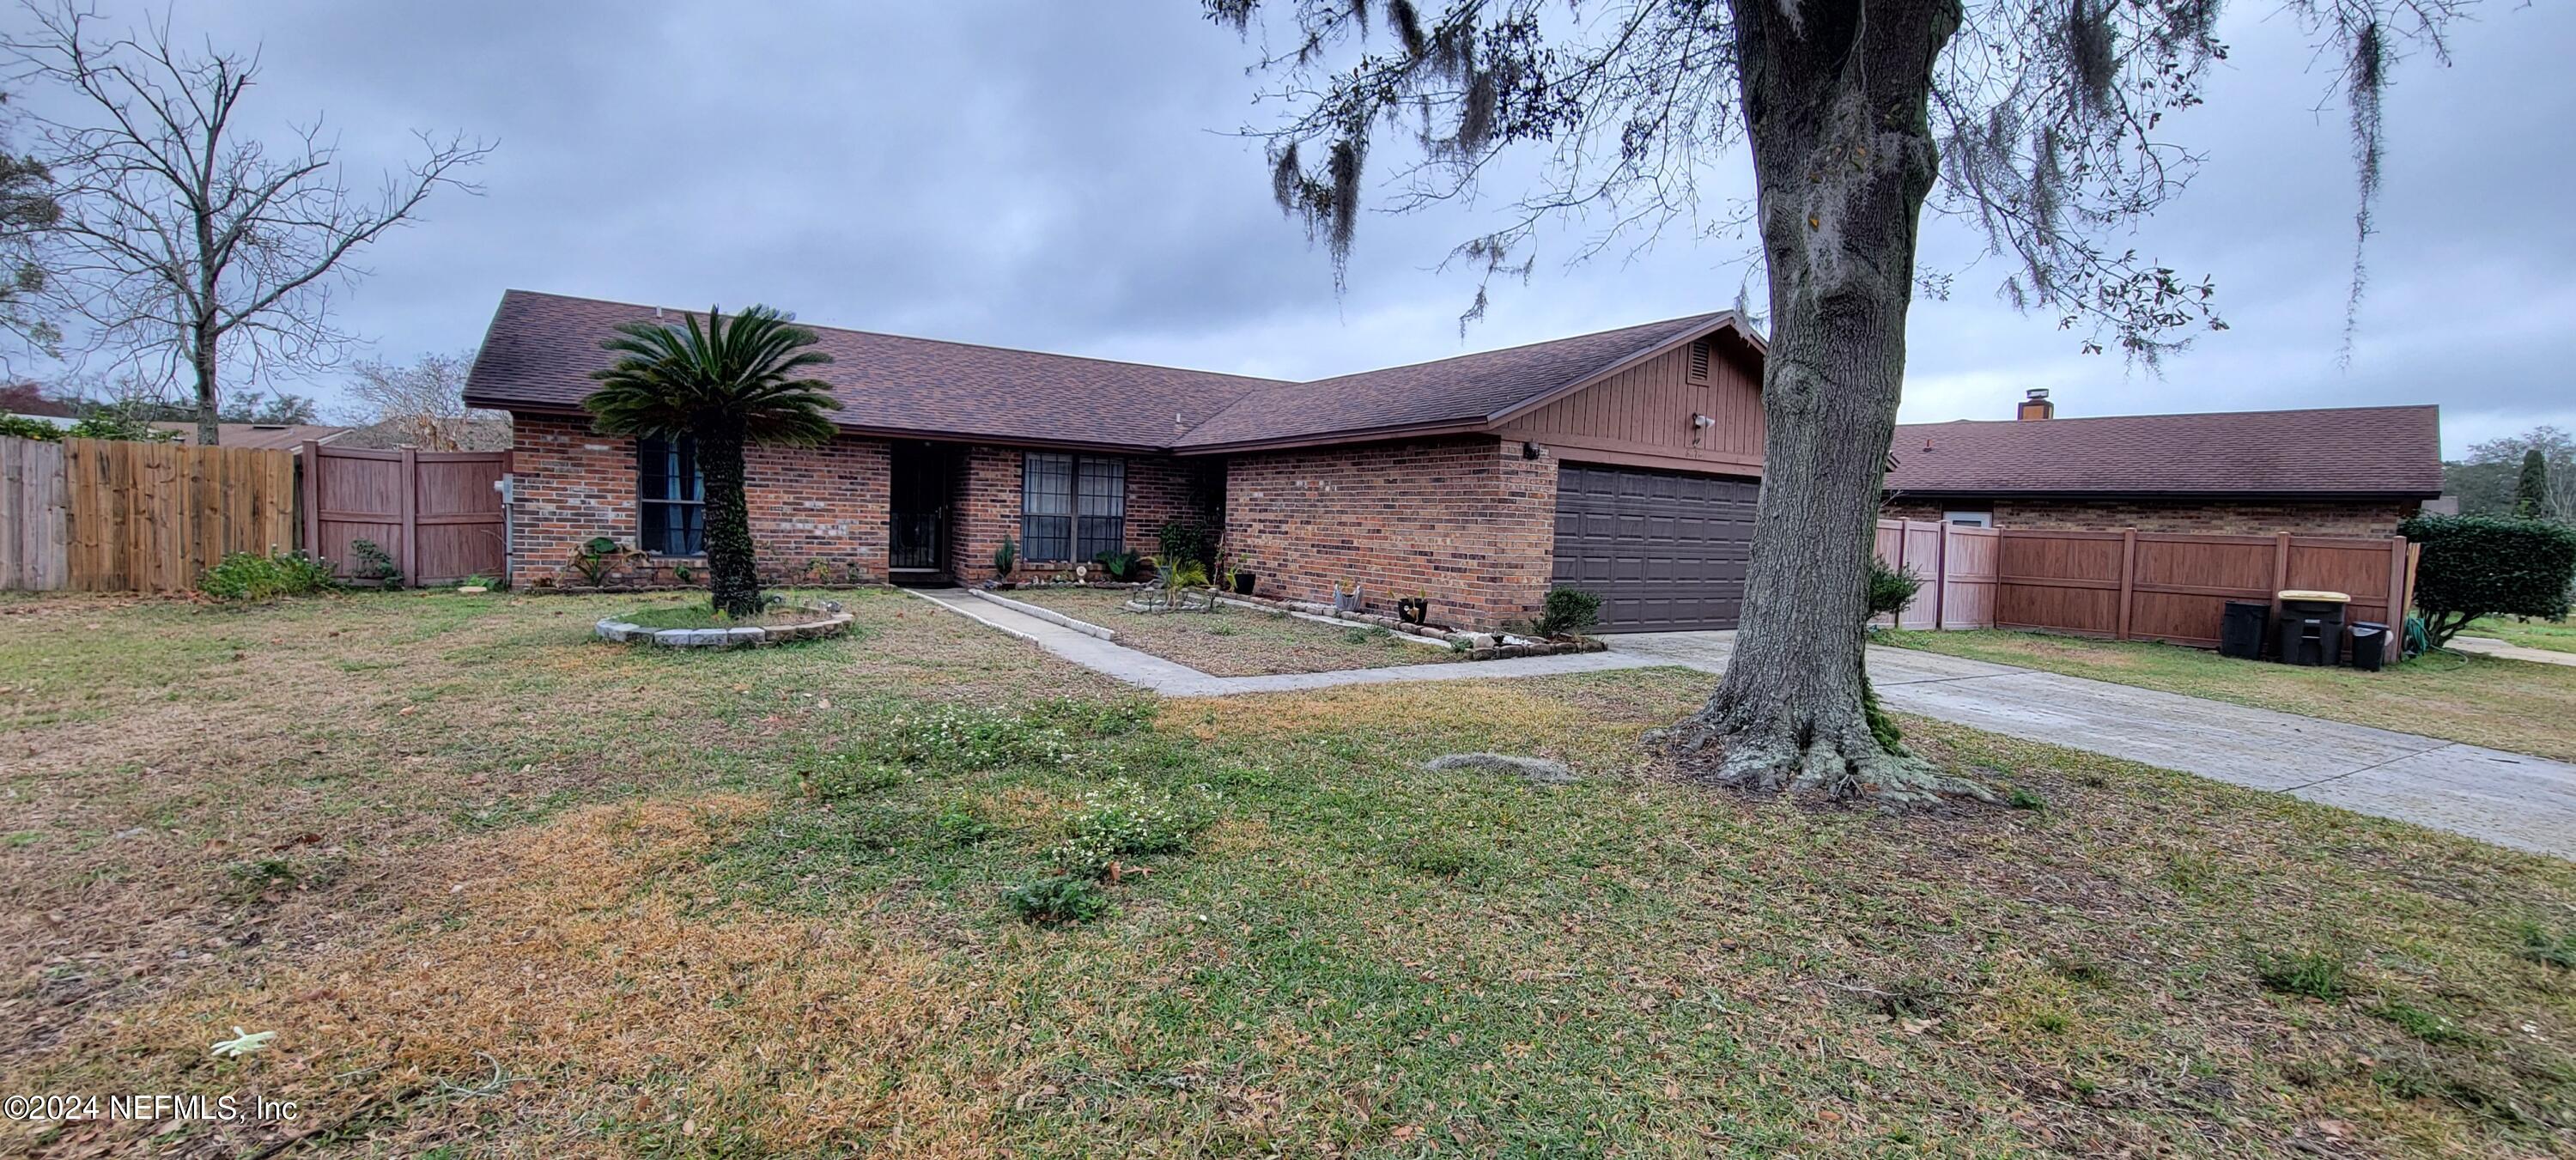 Jacksonville, FL home for sale located at 6278 CRANBERRY Lane W, Jacksonville, FL 32244